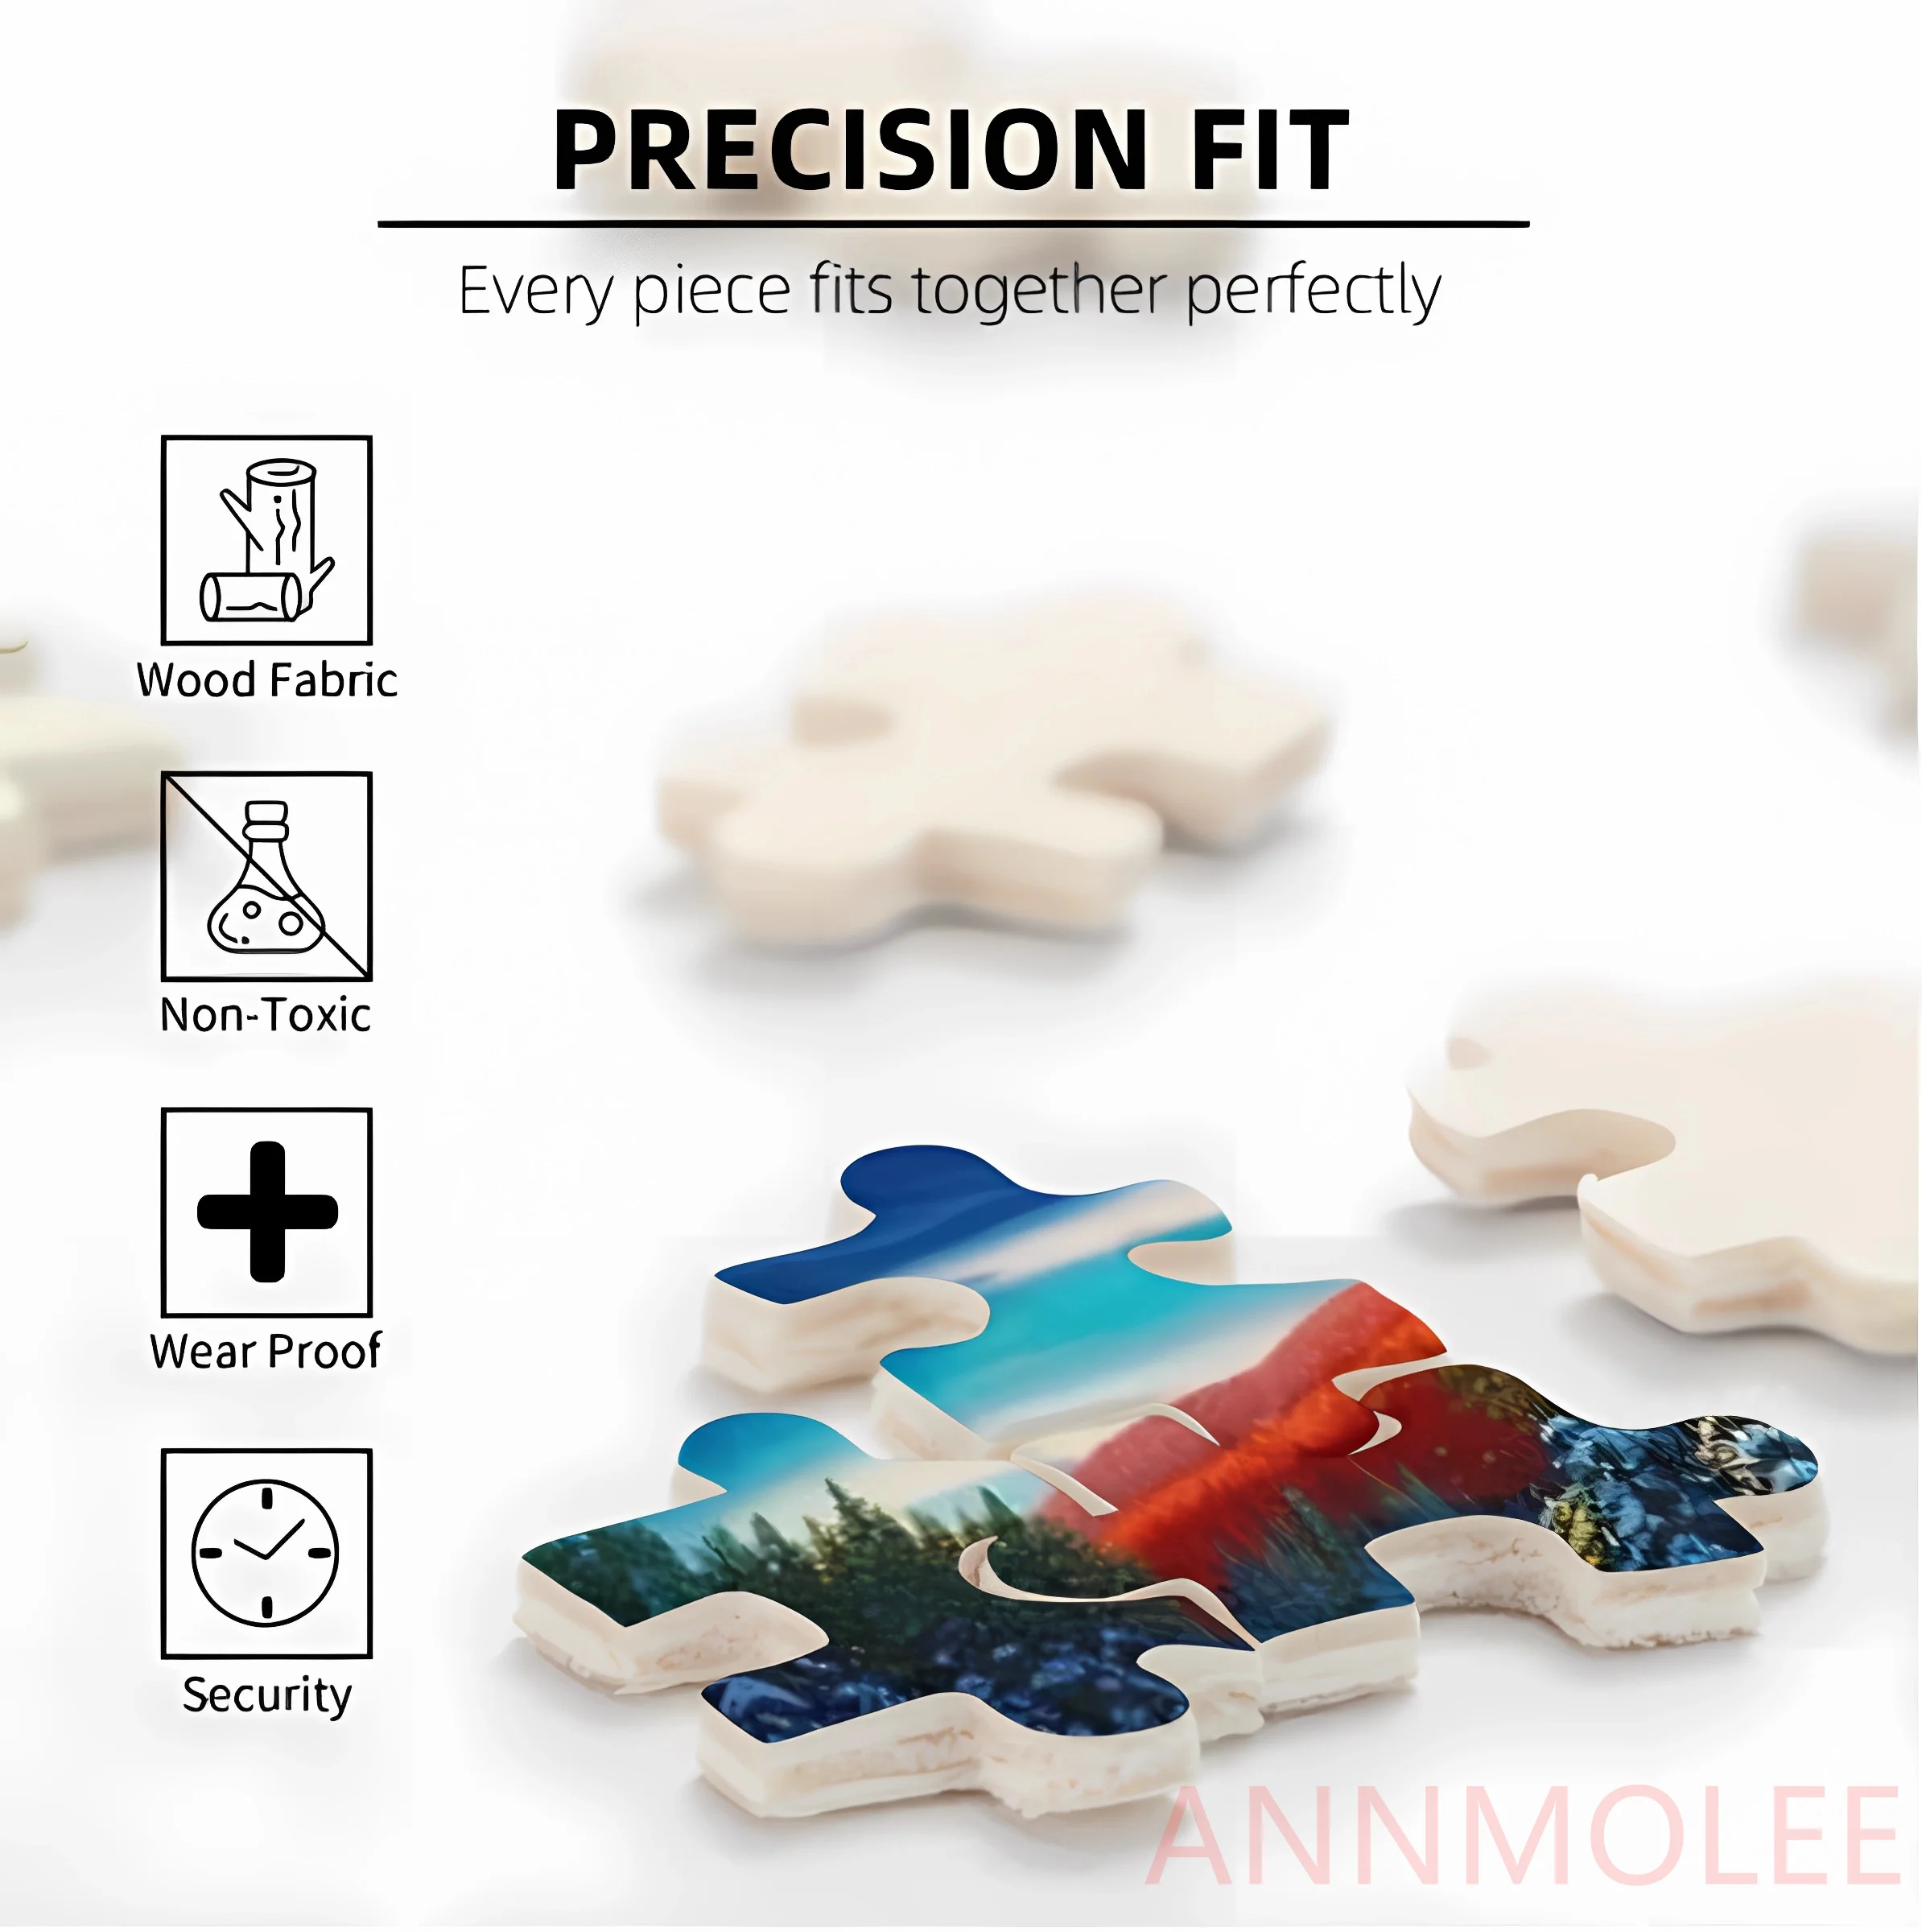 Dog Jigsaw Puzzles 500 Pieces for Adults Difficult Hard Art Animals Jigsaw  Puzzle for Women Men Premium Precise Interlocking Challenging Game